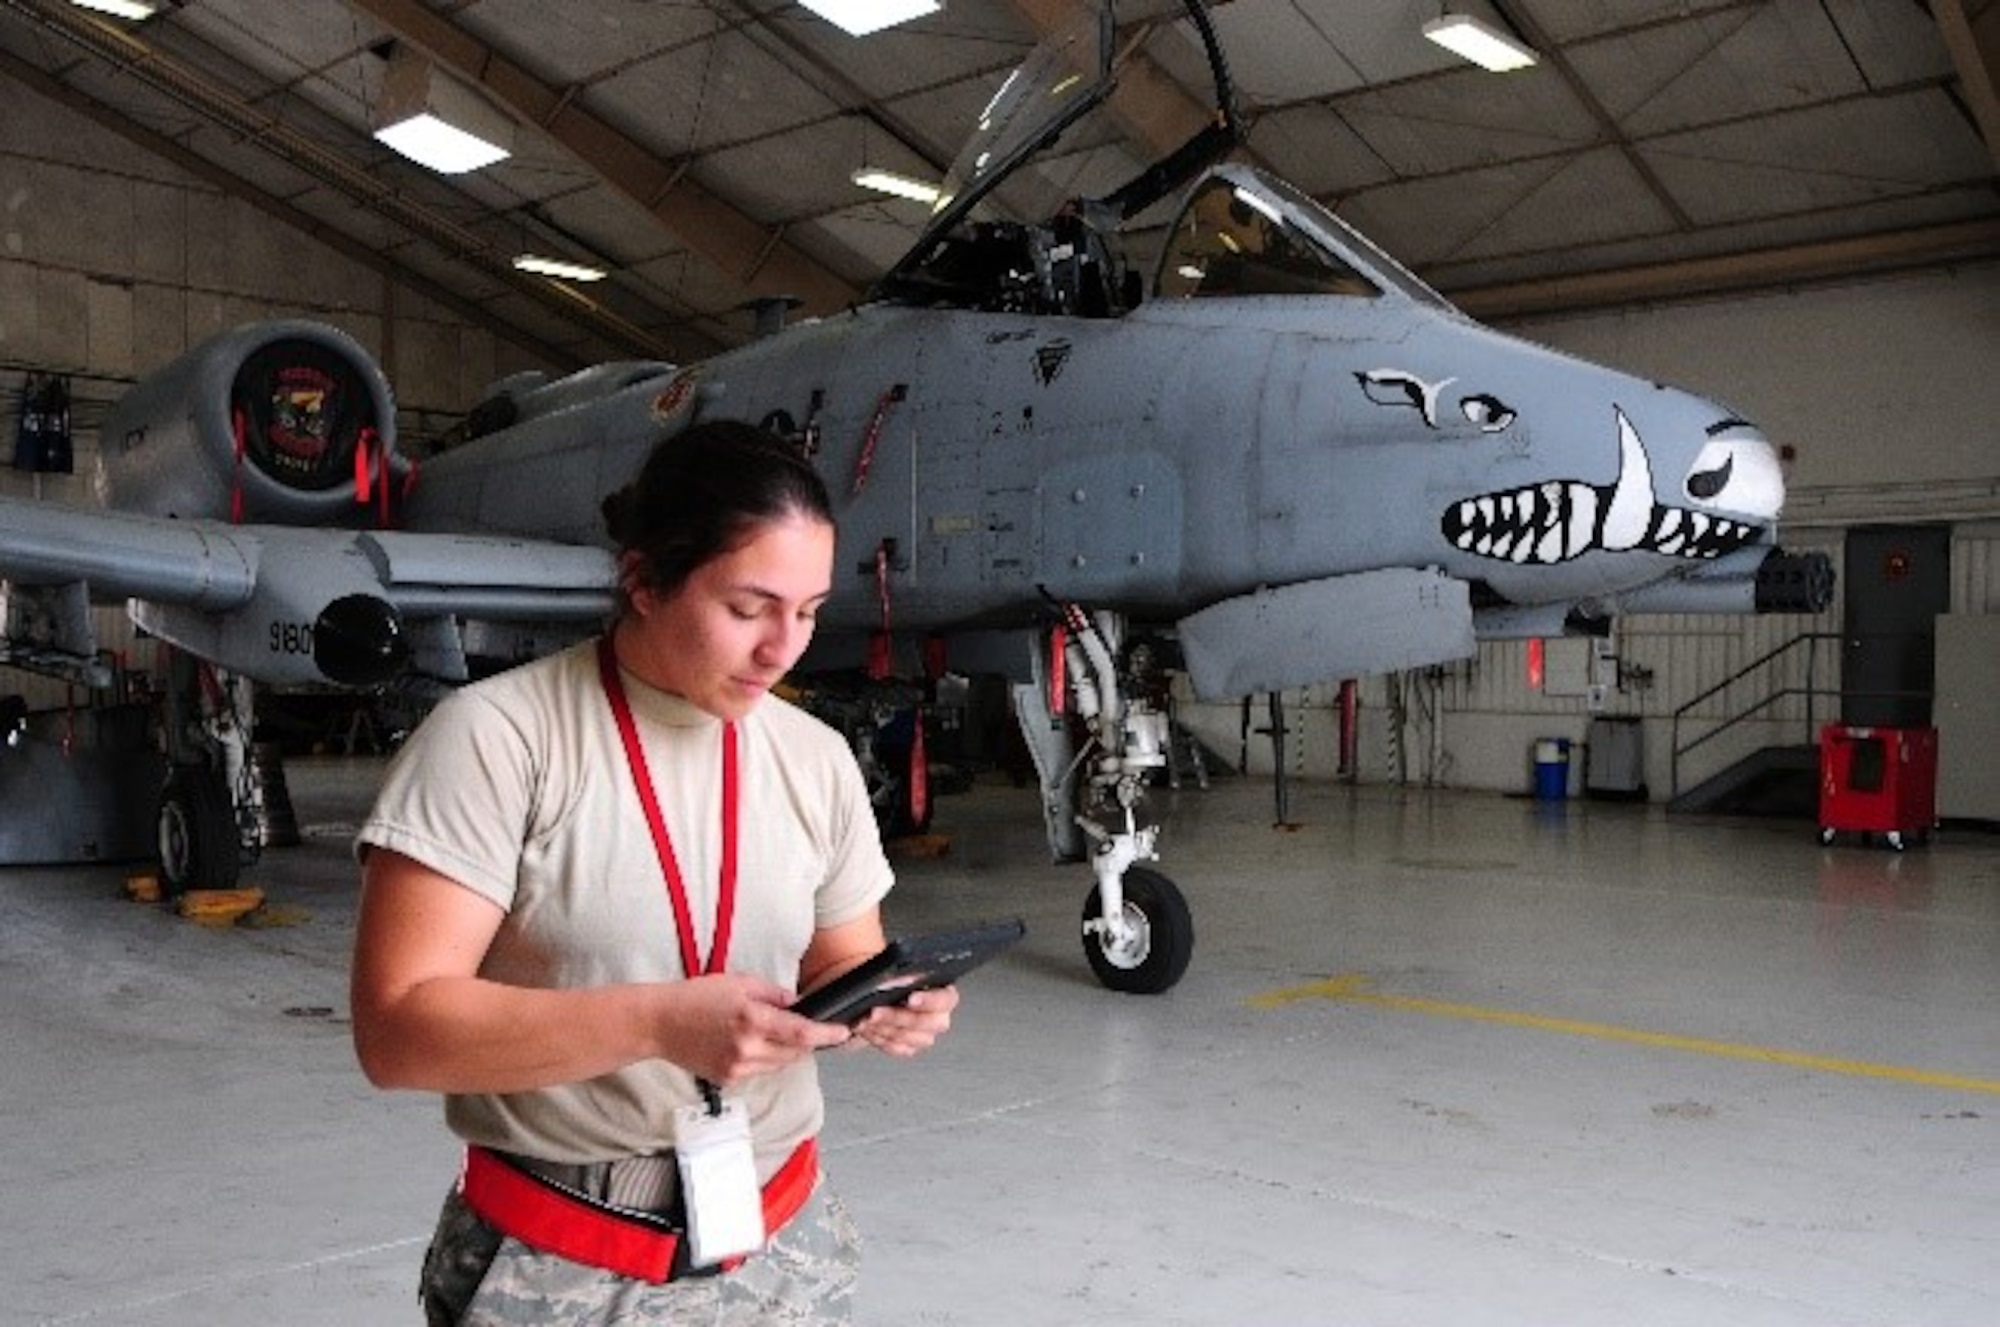 Senior Airman Amanda Gonzales, 924th Fighter Group crew chief, checks her technical orders before beginning maintenance on an A-10 Thunderbolt II in a hangar on Davis-Monthan Air Force Base.